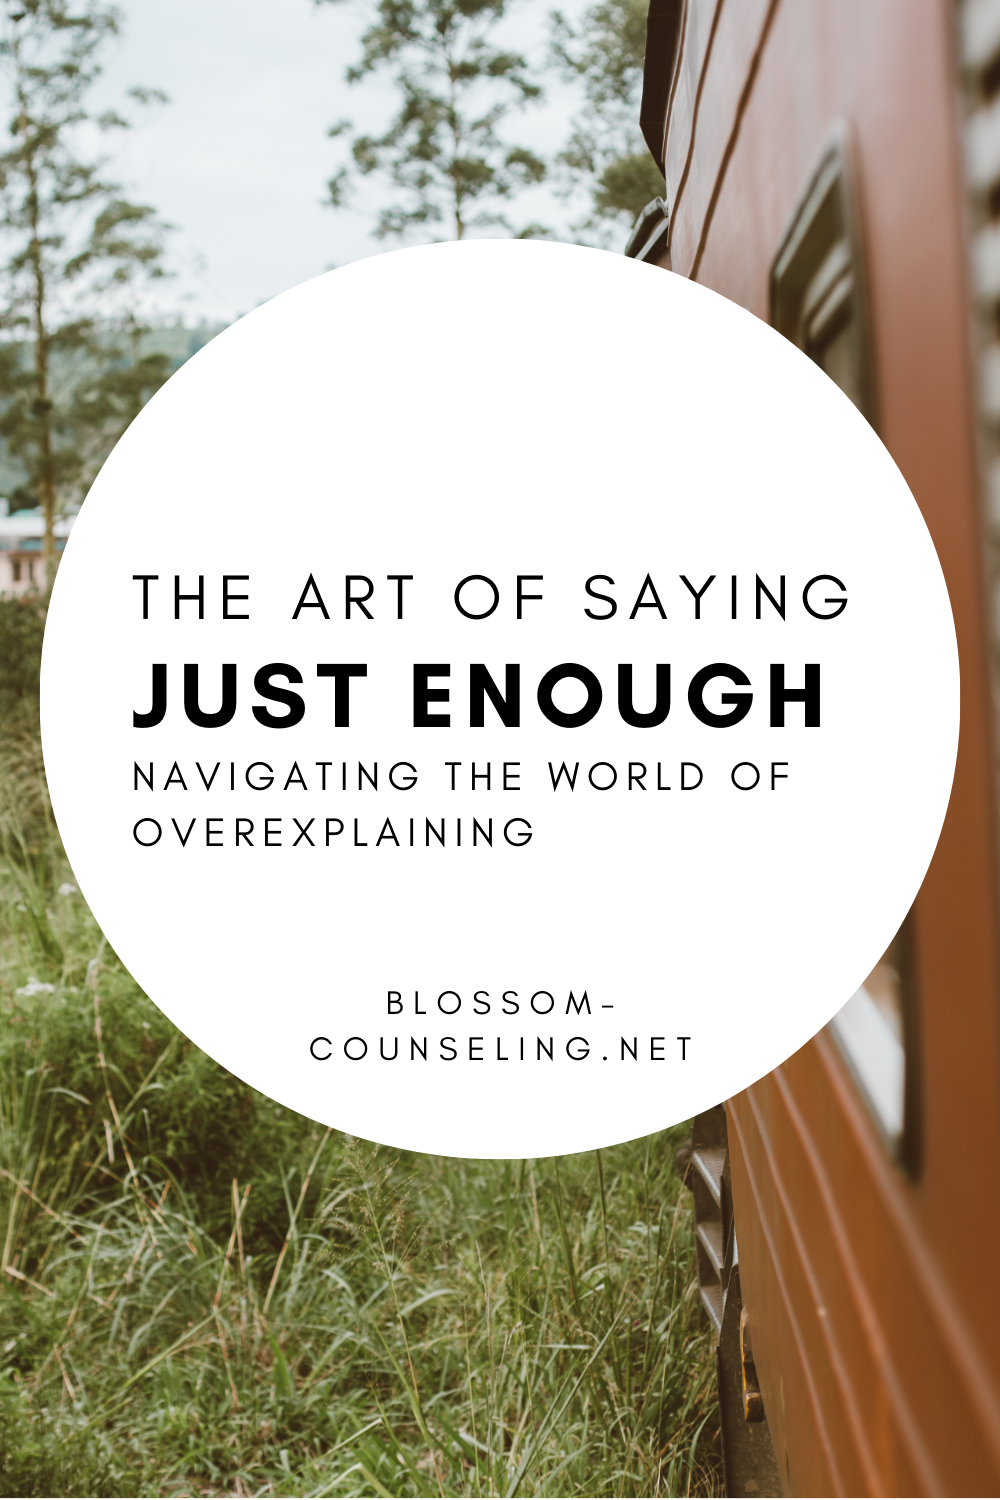 The Art of Saying Just Enough: Navigating the World of Overexplaining